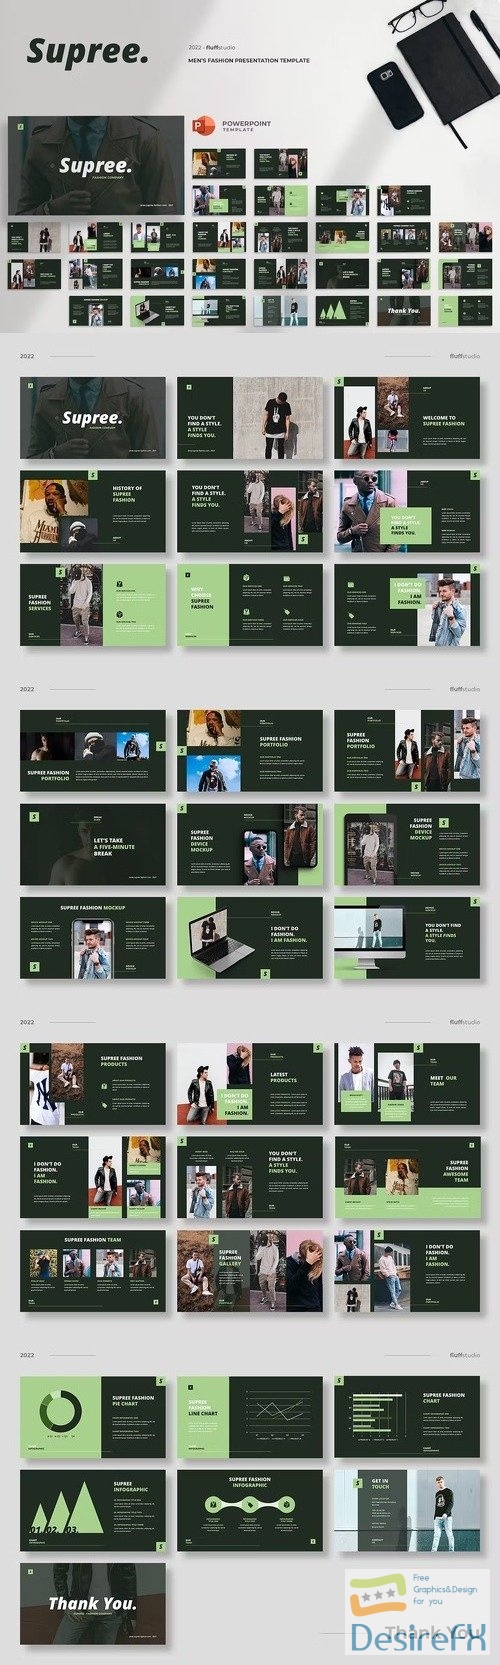 Supree - Men's Fashion Powerpoint Template BYRLHCJ